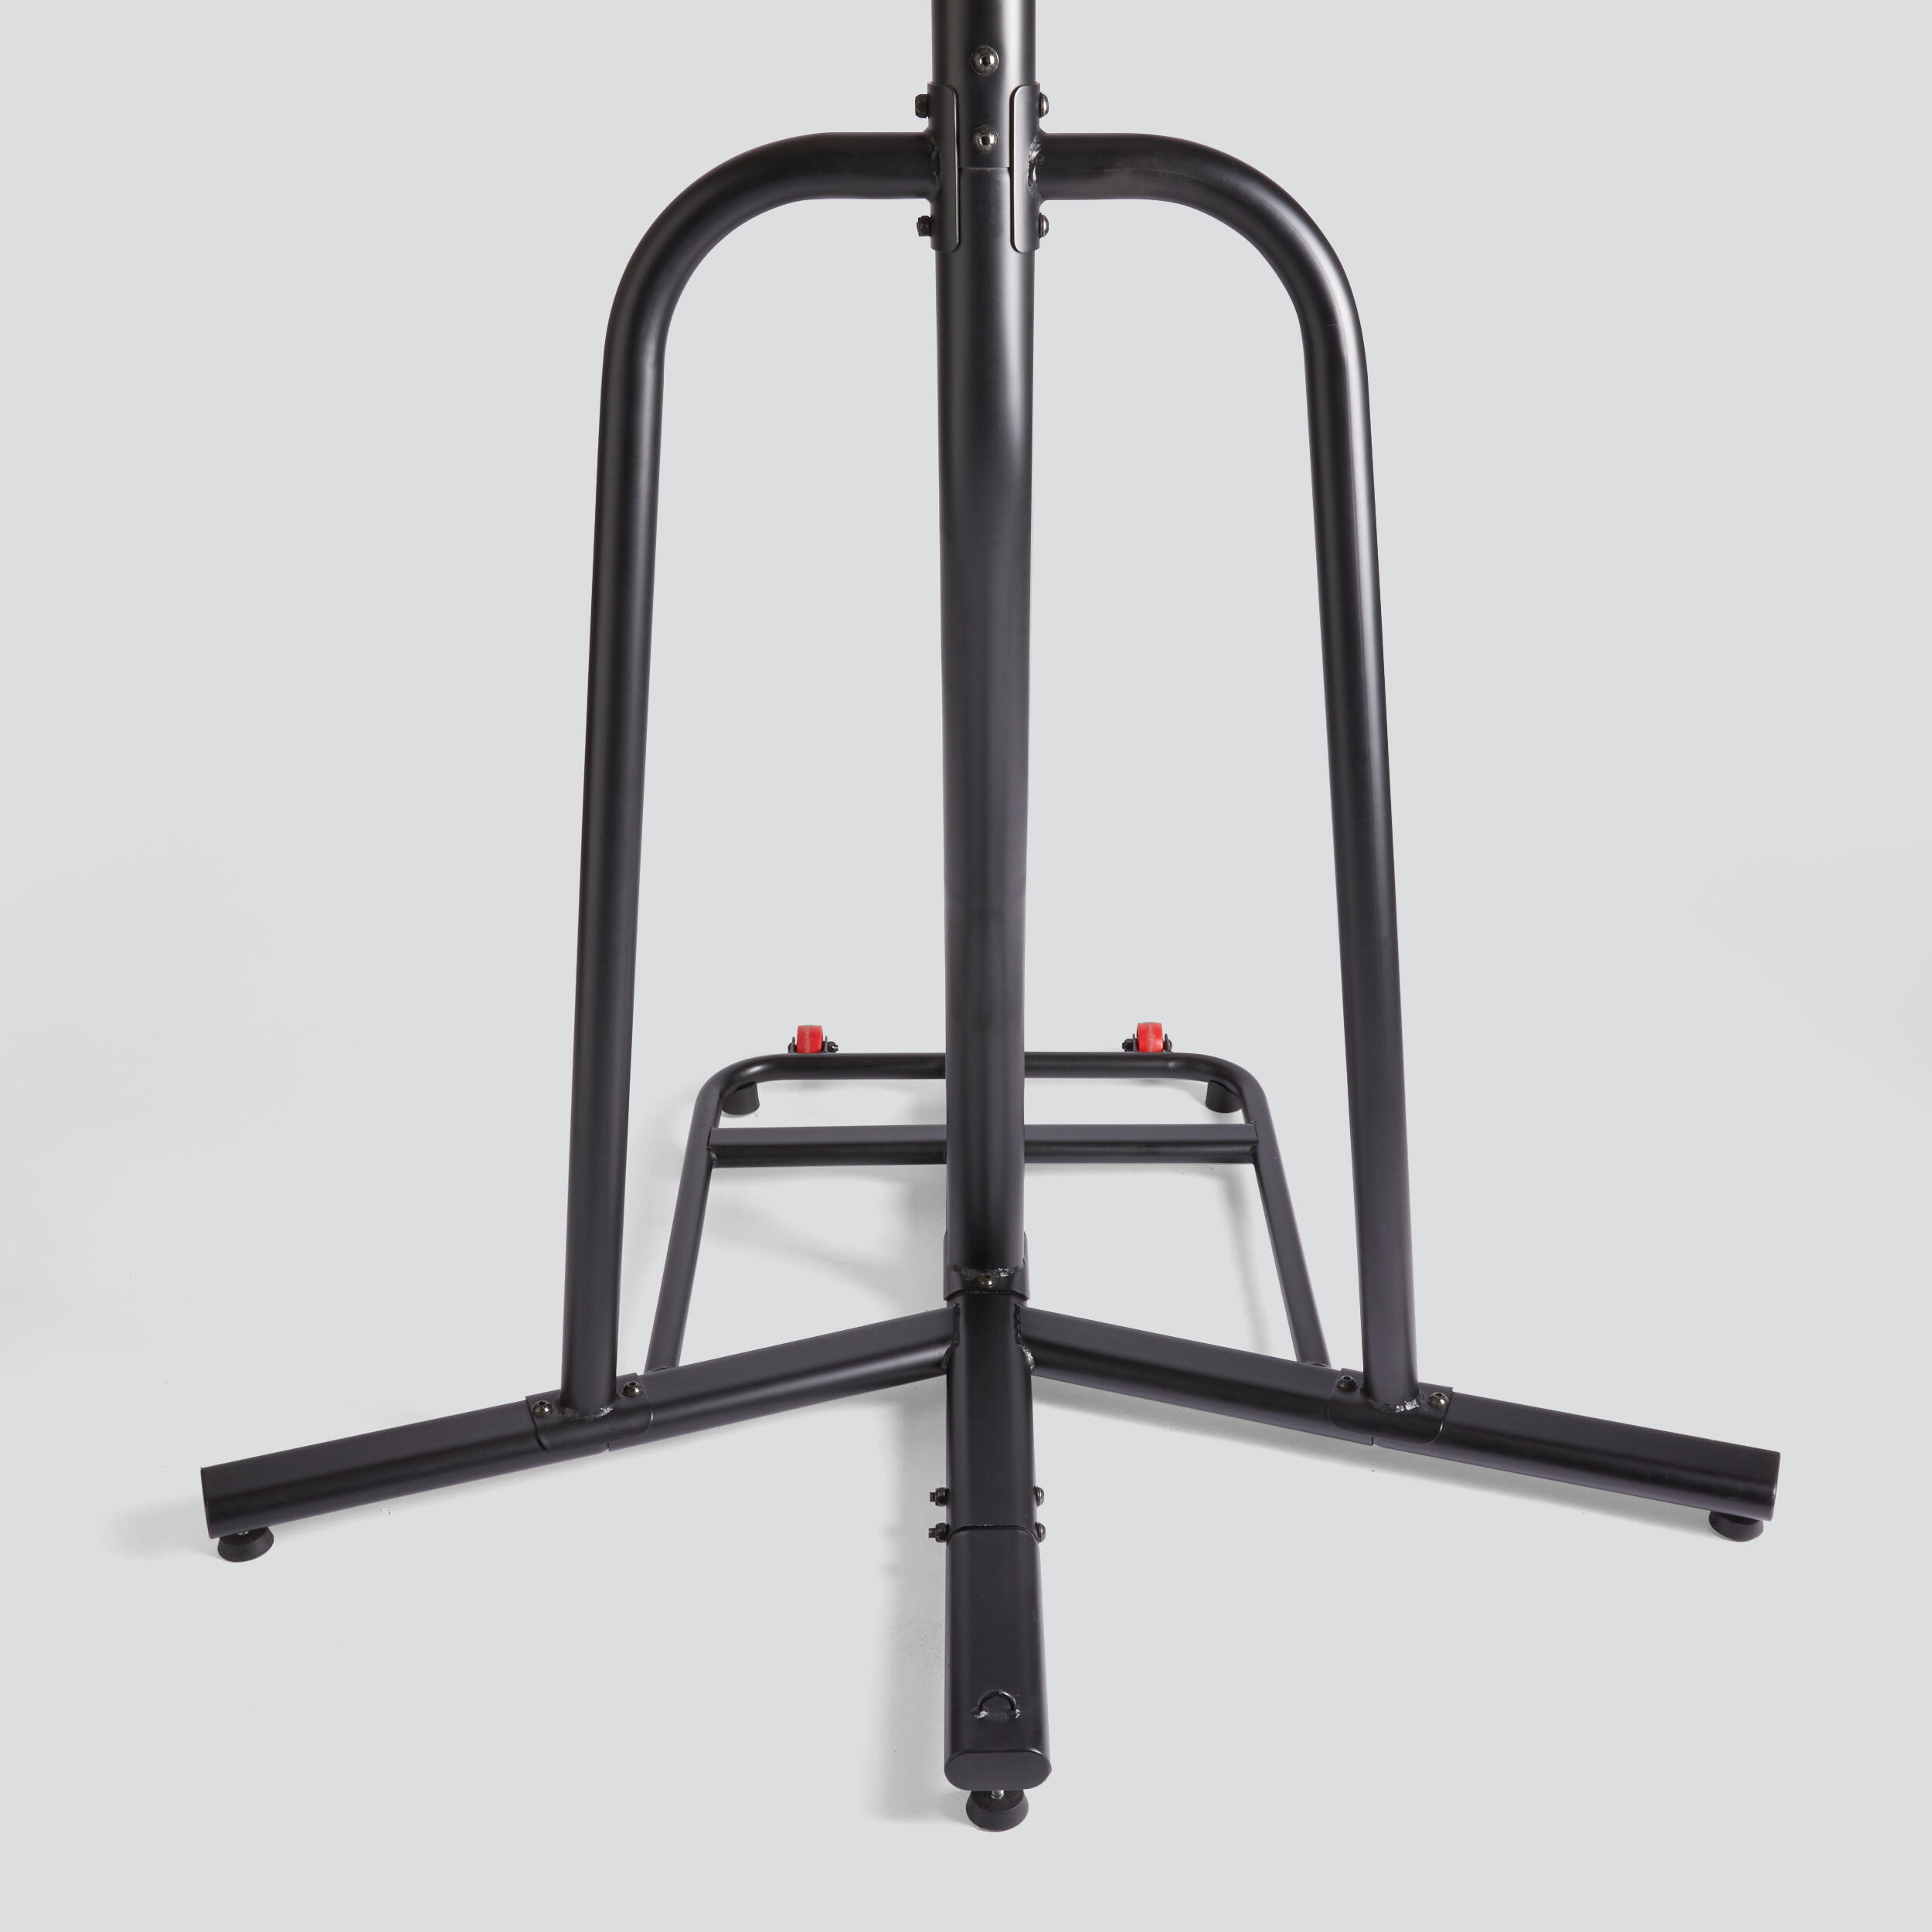 Free-standing Versatile and Weightable Punching Bag Stand 900 4/9